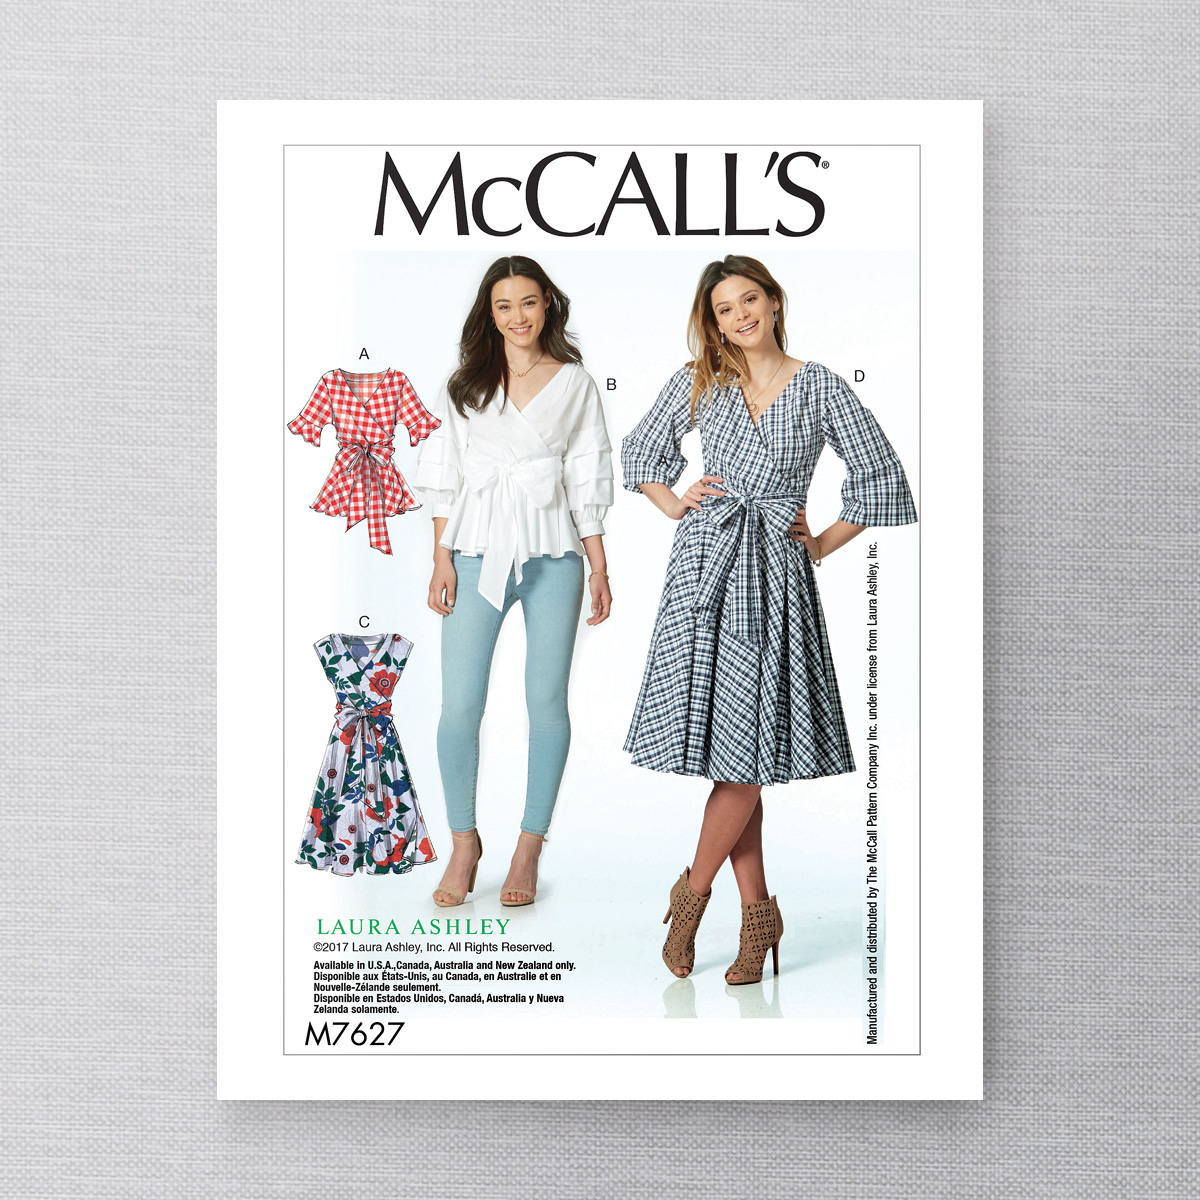 New arrivals: McCall's patterns | Clubtissus.com